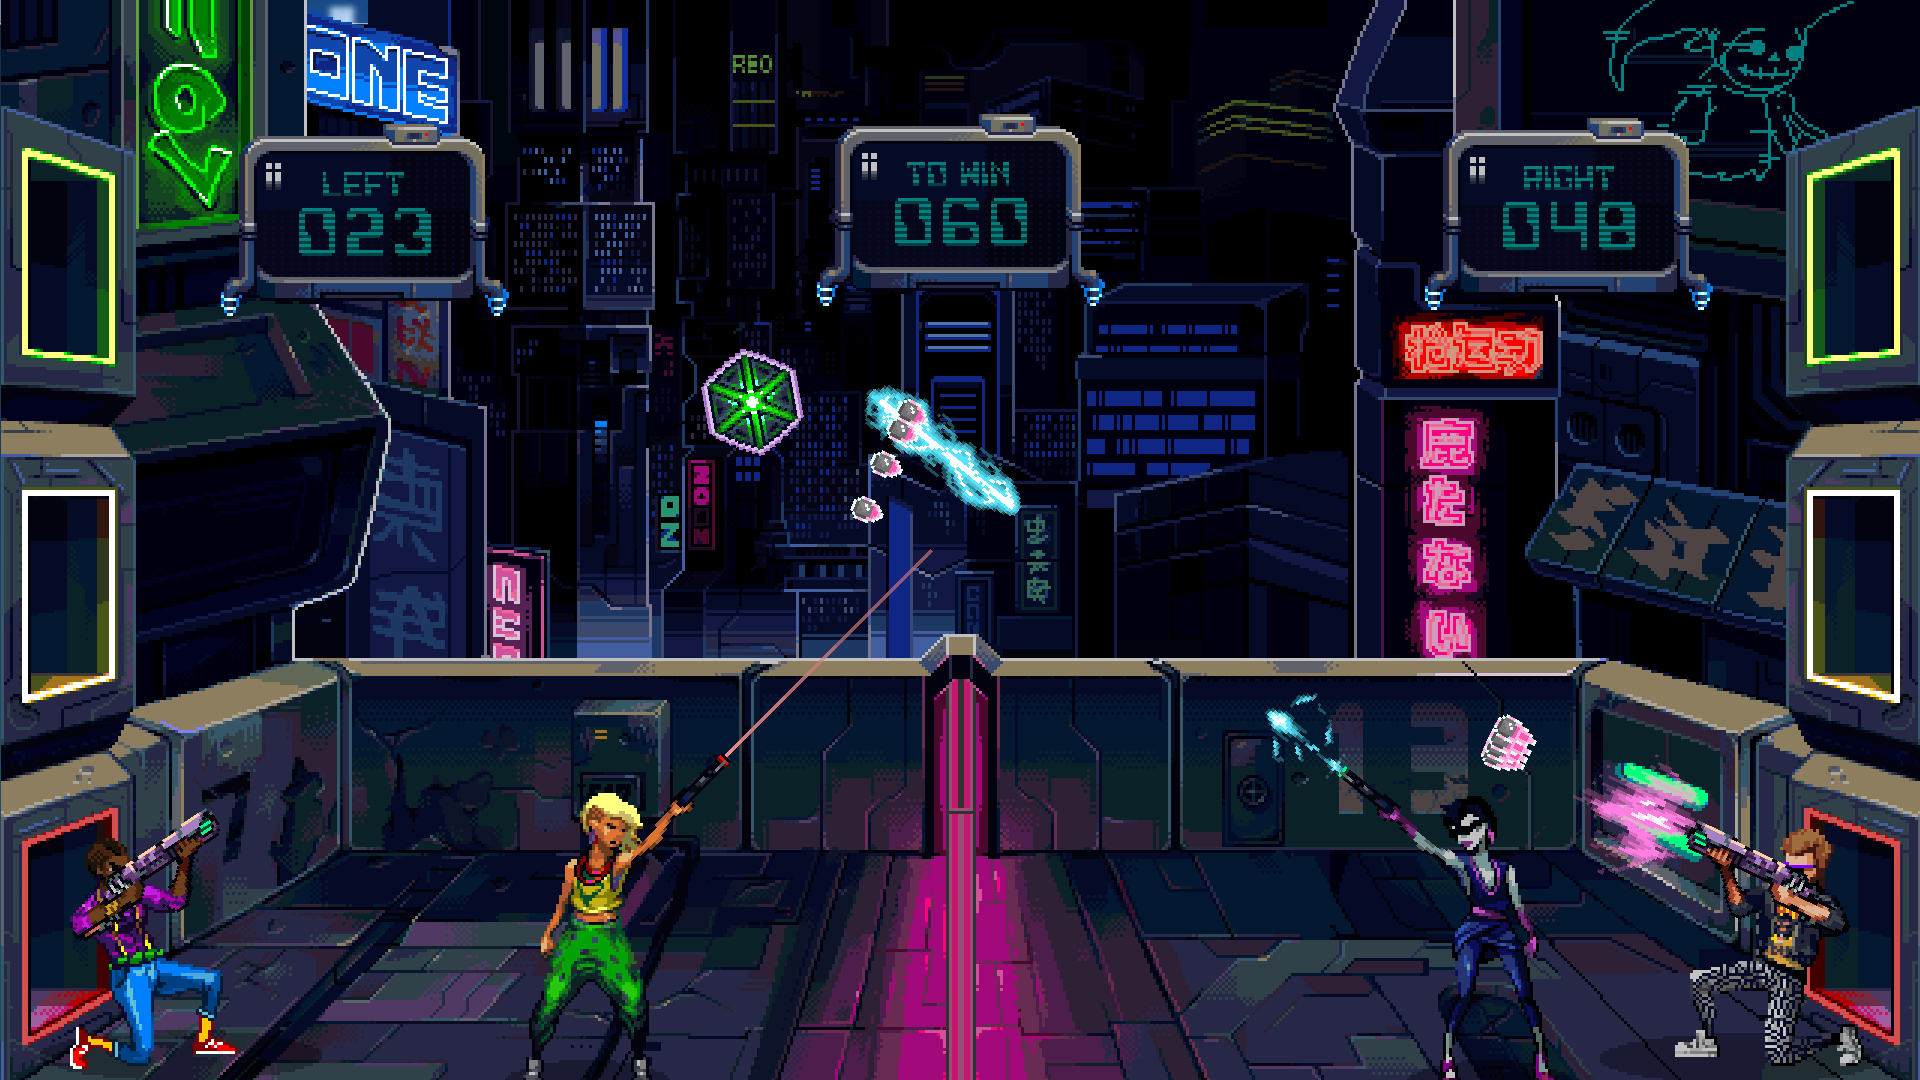 Gunsport Makes Volleyball Fun with Guns in a Dystopian, Neon-Drenched Future